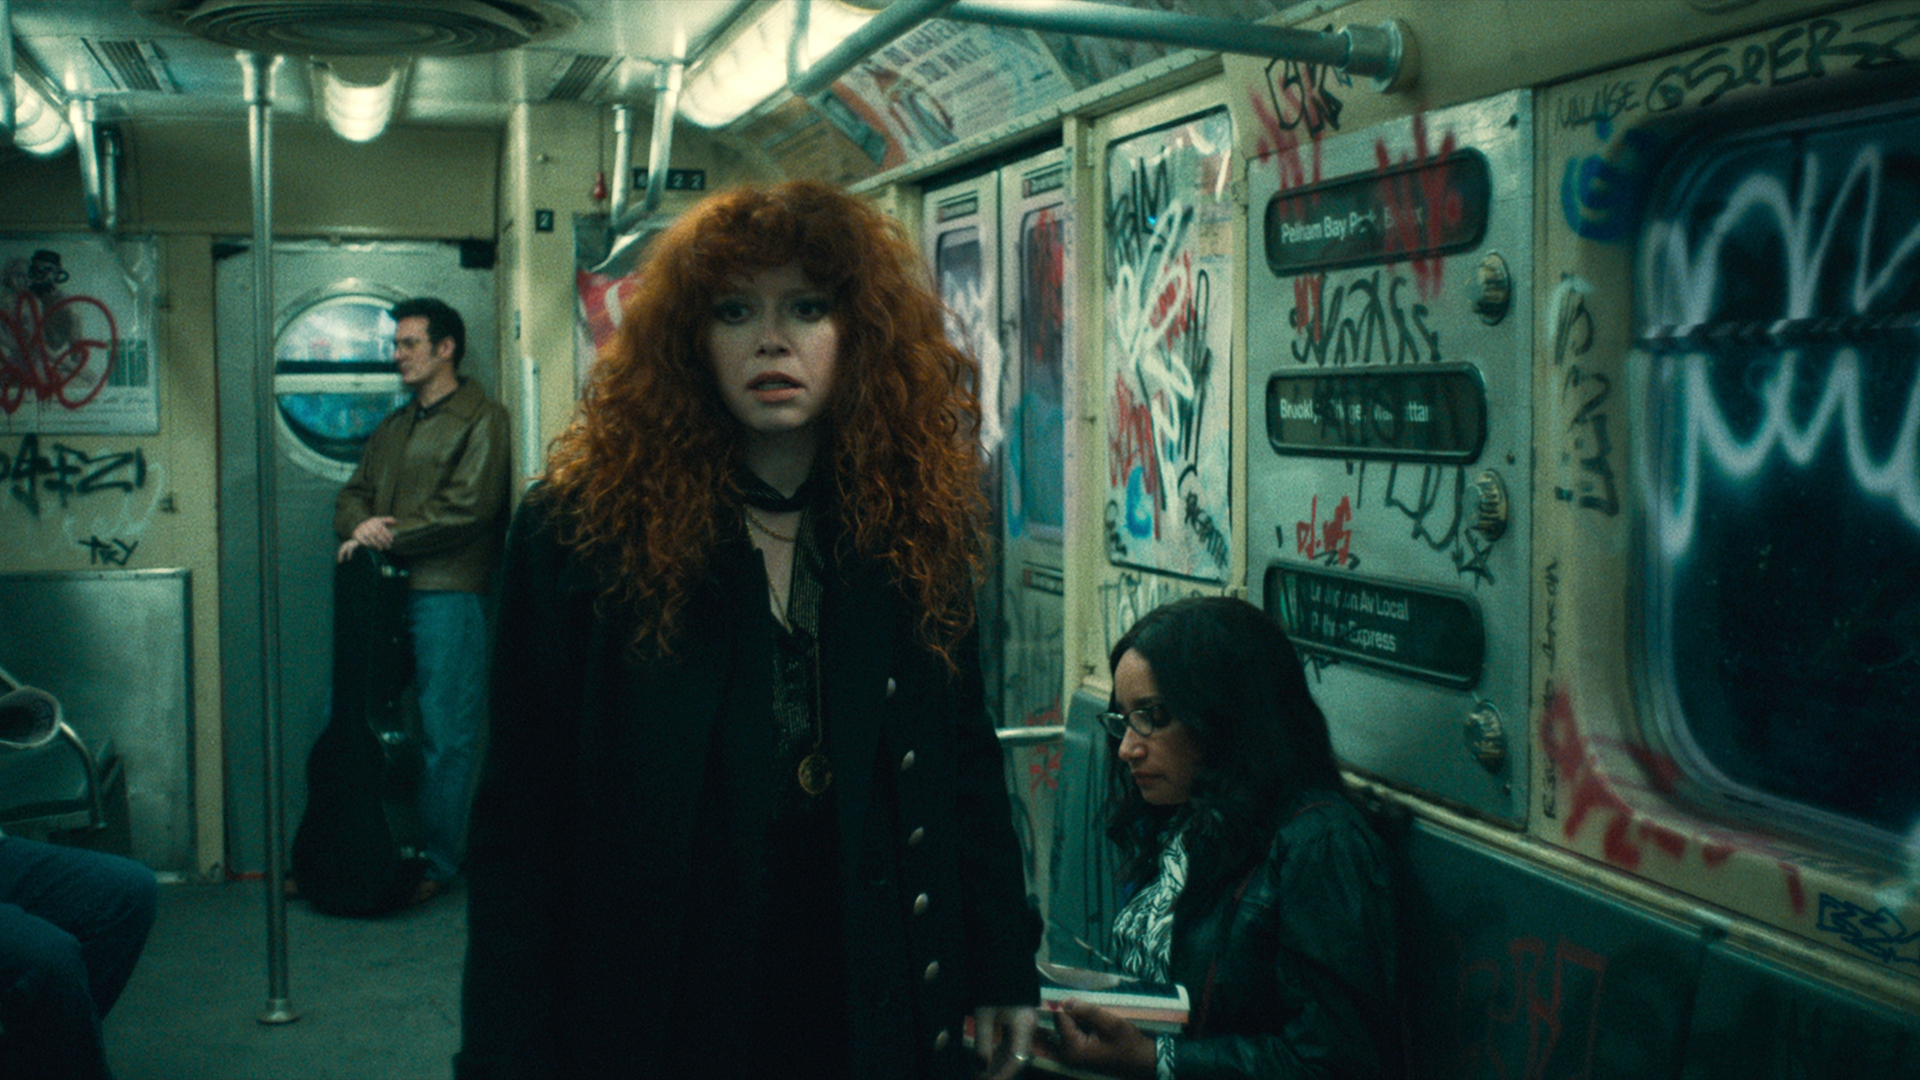 Nadia looks uneasy as she stands on a subway train in Russian Doll season 2